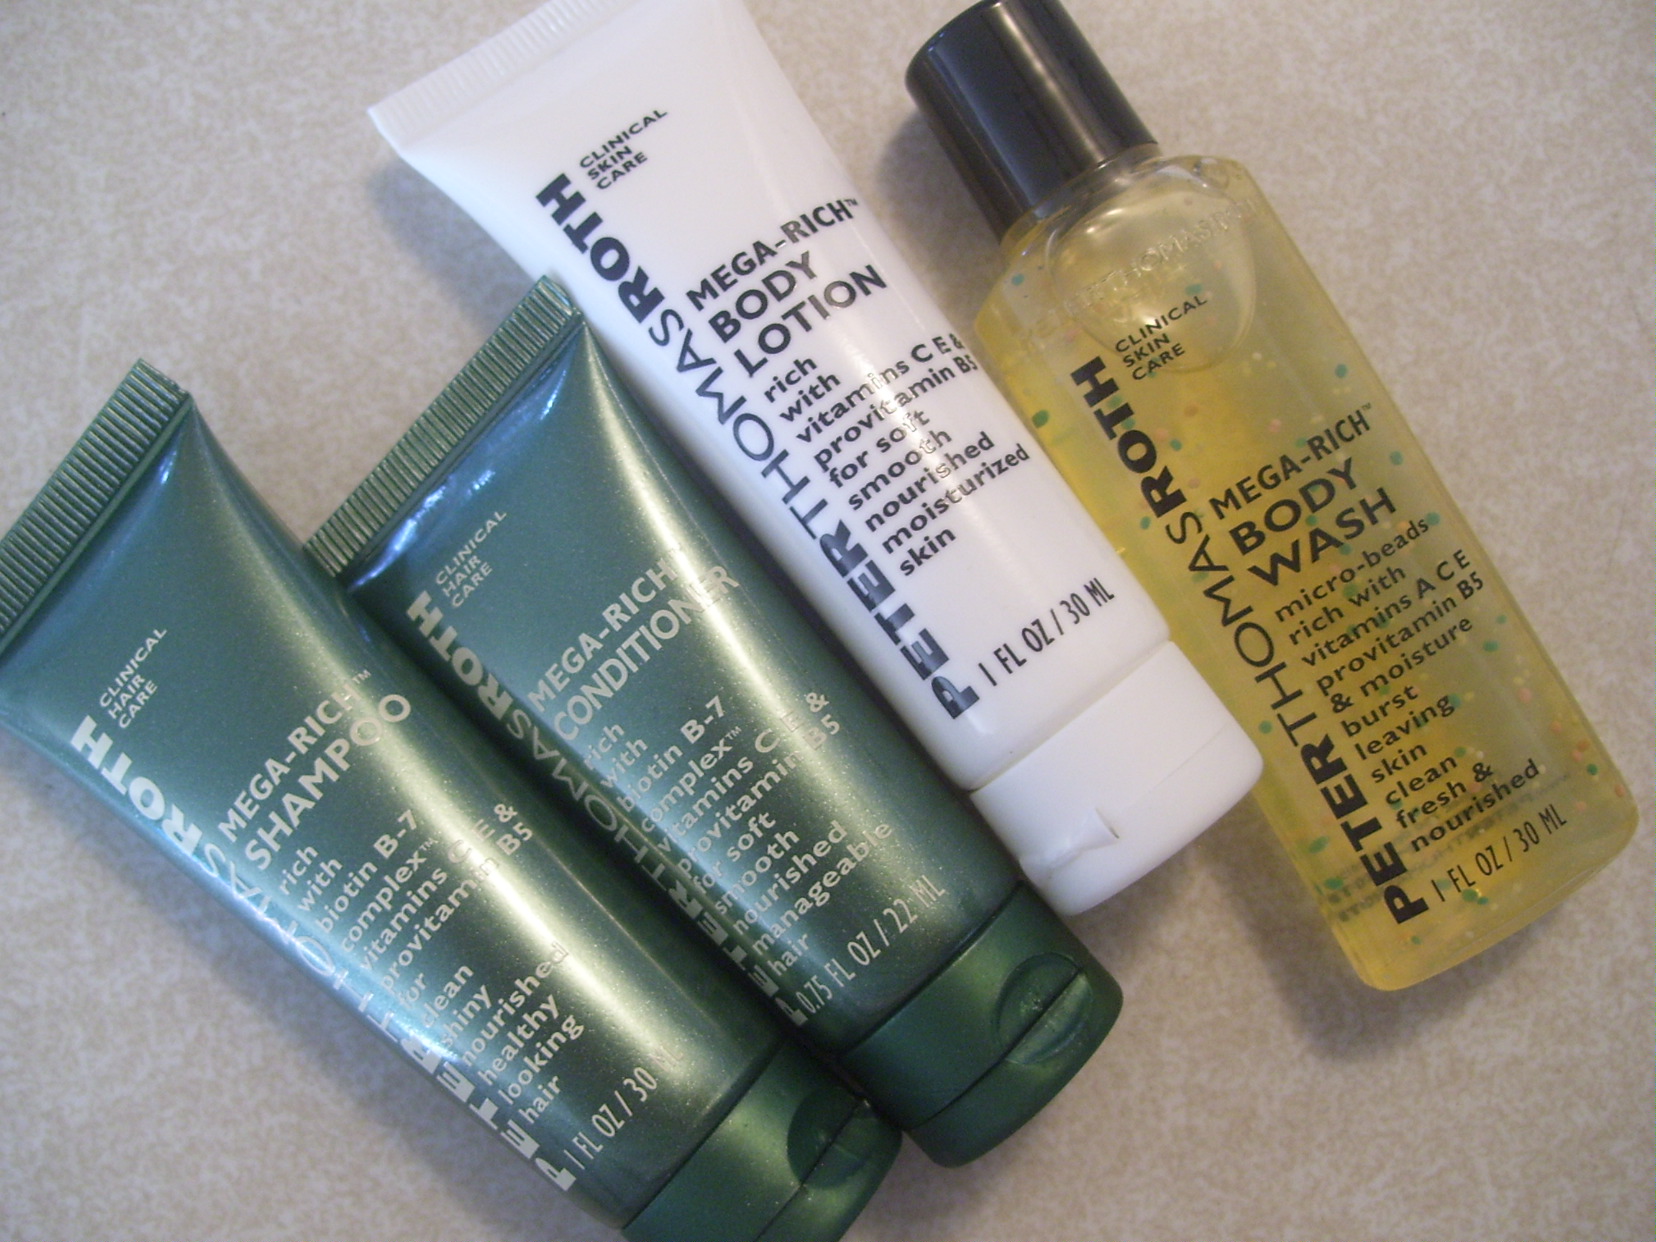 Peter Thomas Roth’s Mega-Rich Body Collection